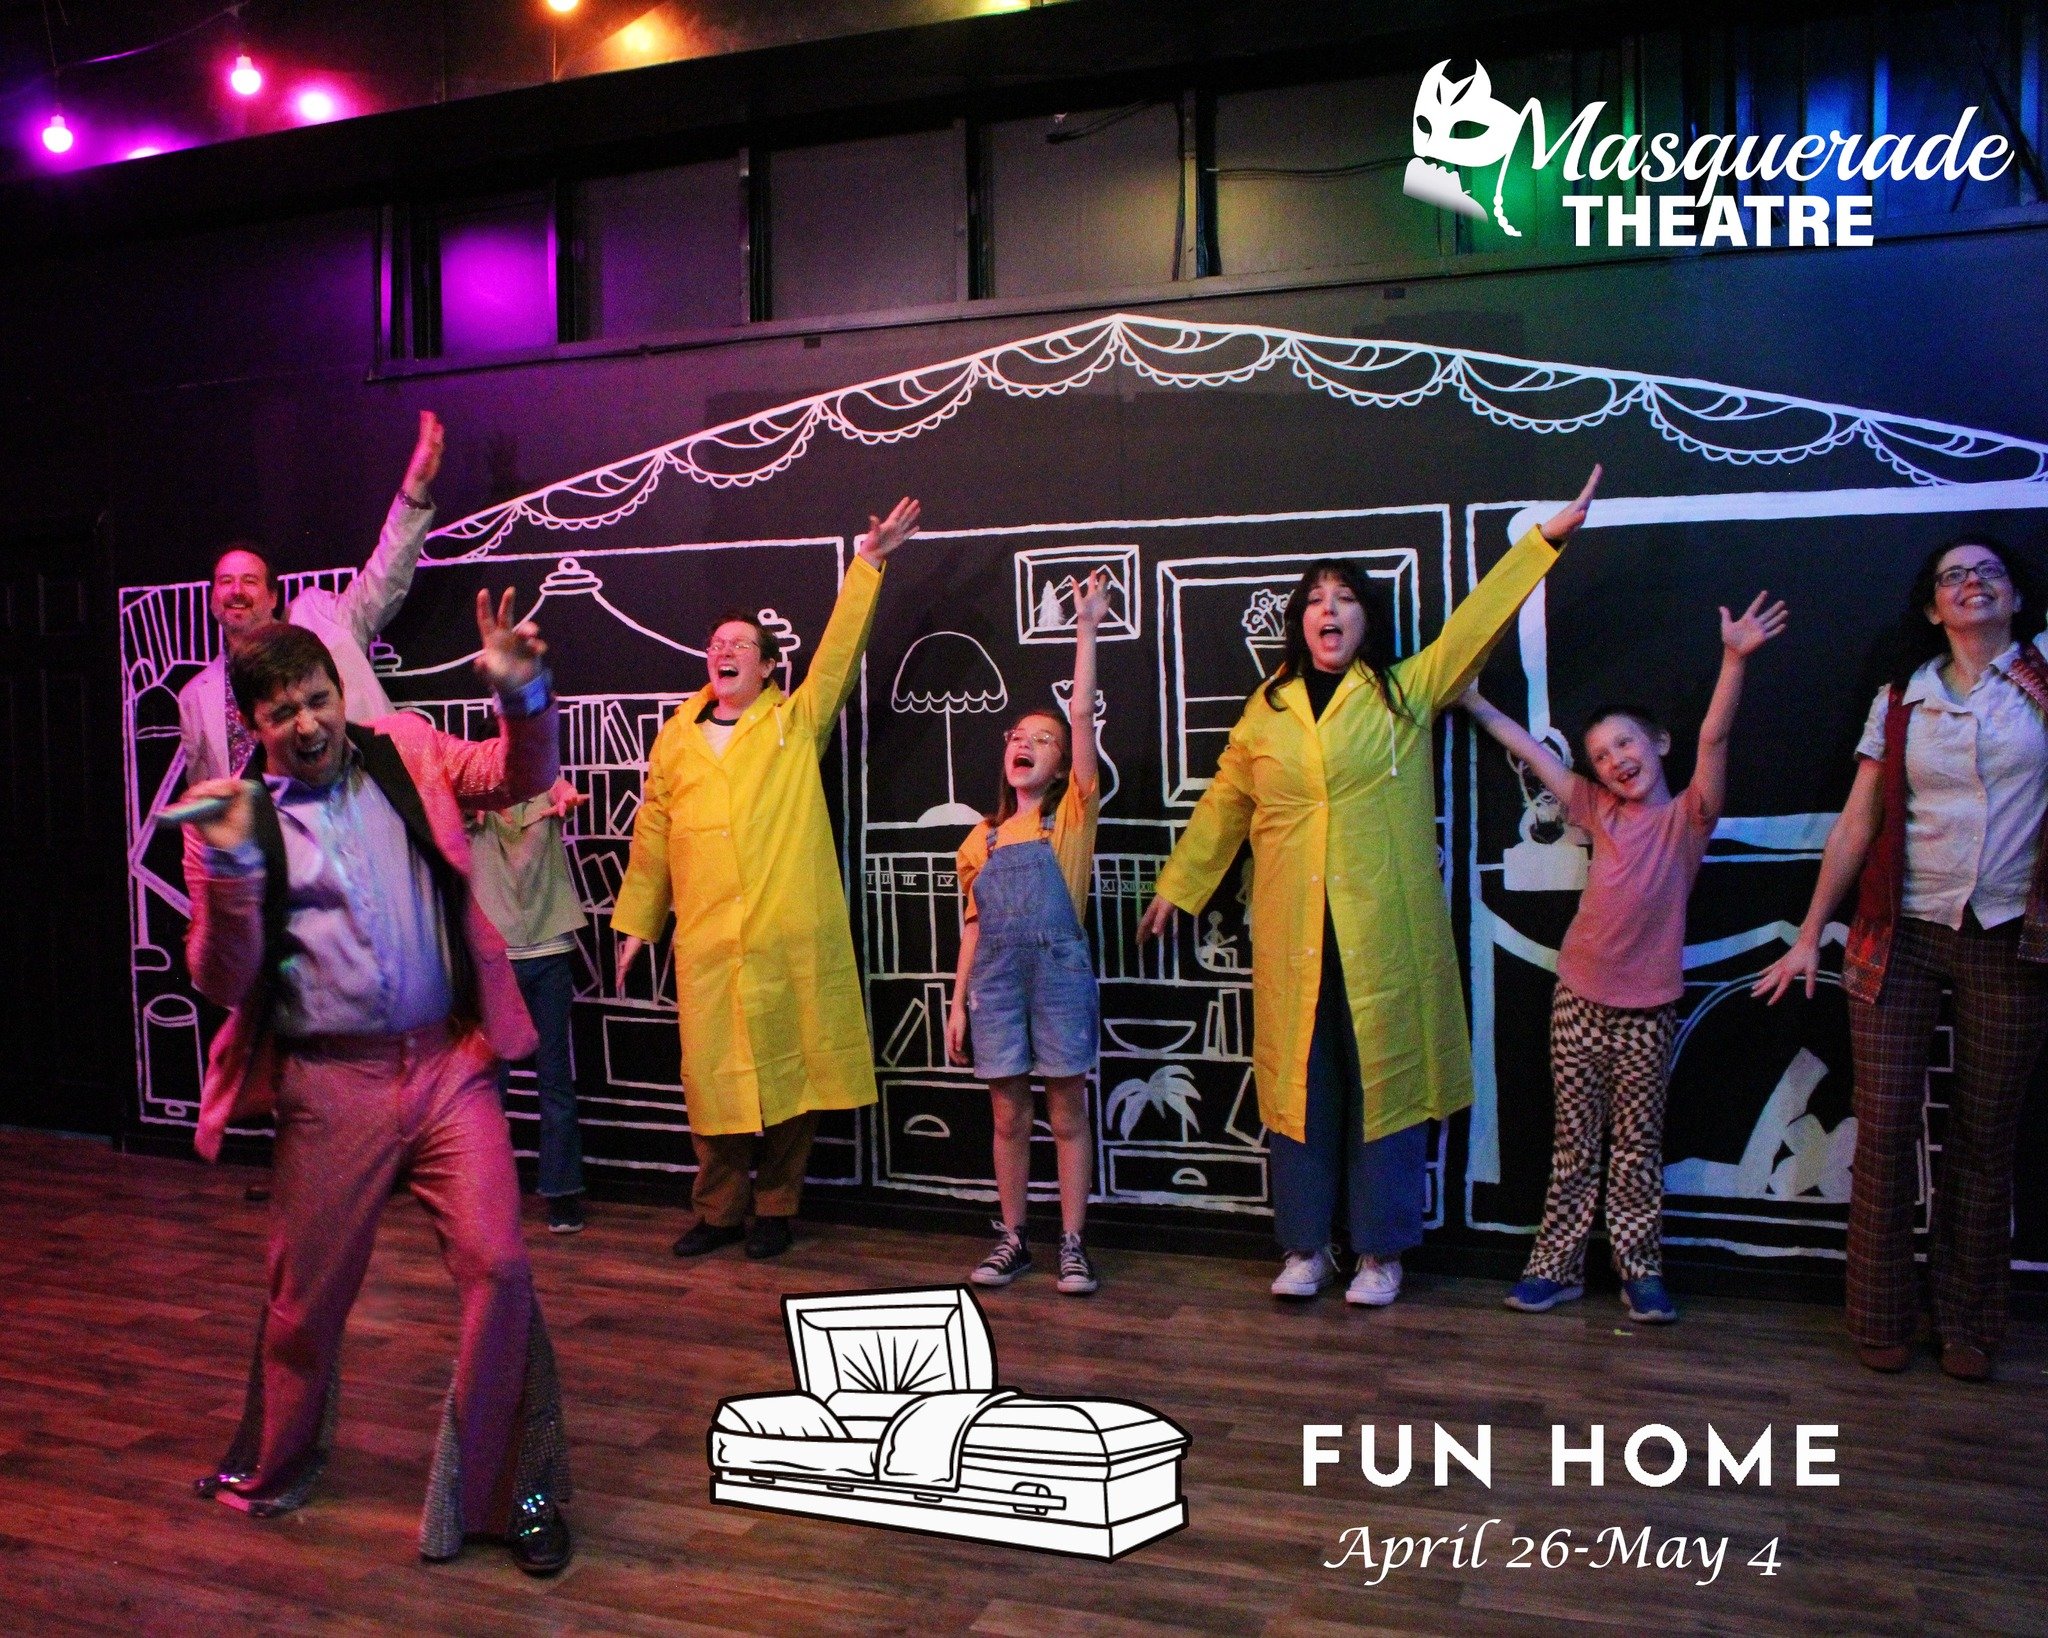 Get out and see what the fuss is all about!  Come see Fun Home at Masquerade Theatre. 
 Final 4 shows this Thursday-Saturday.  Pay-What-You-Can nights this Thursday and Friday.  Get your tickets NOW: https://www.masqueradetheatre.org/show.../funhome2